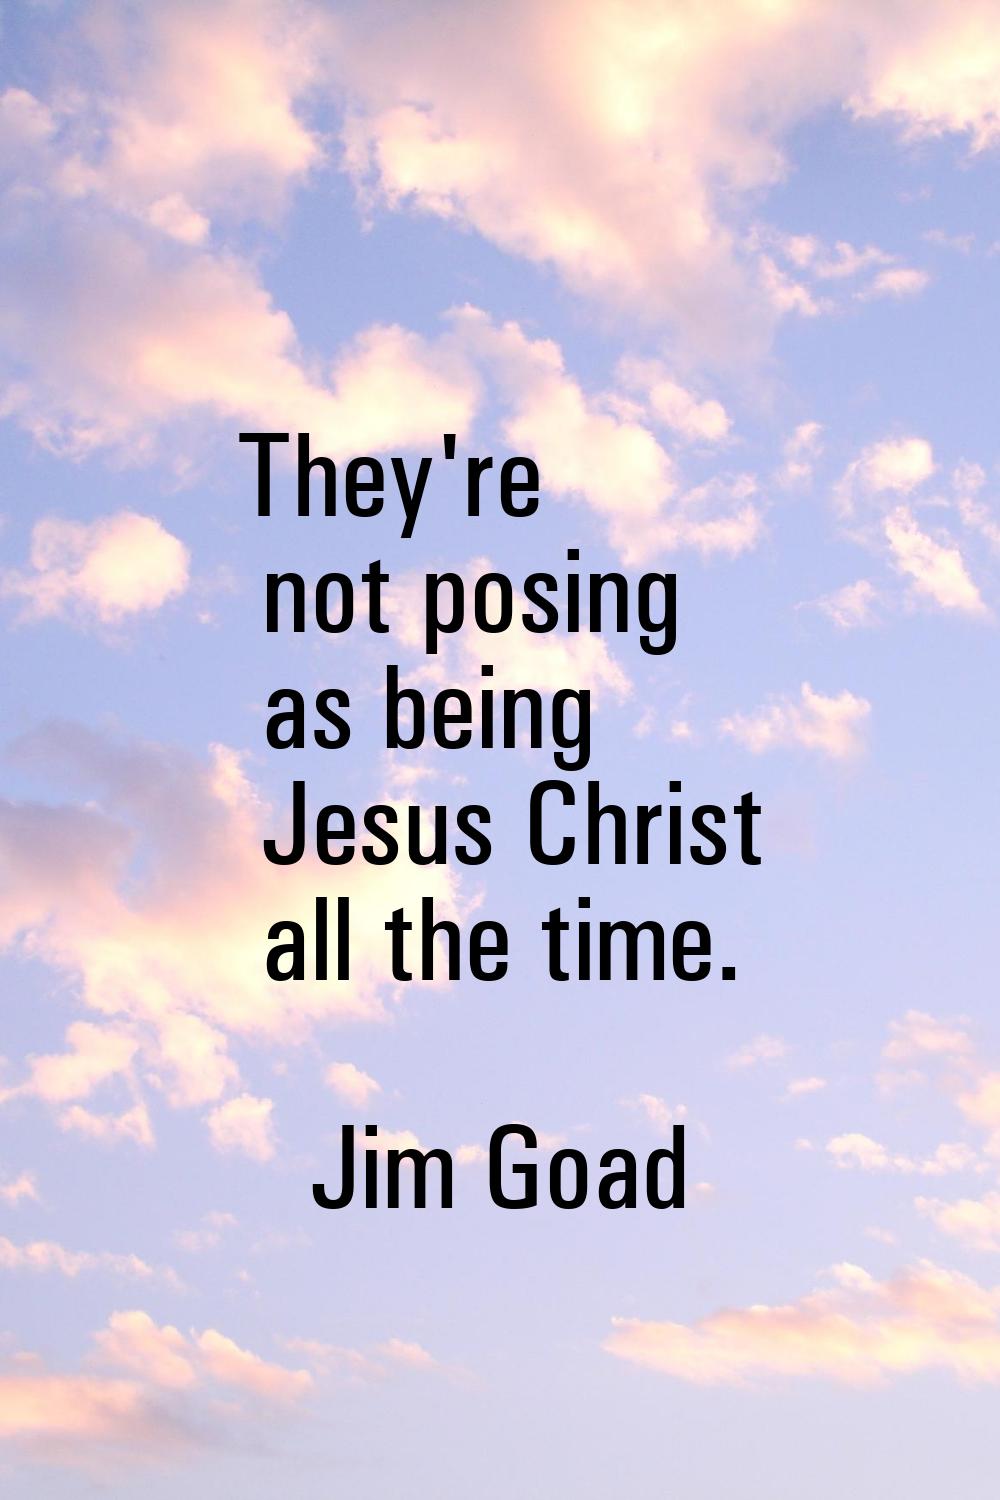 They're not posing as being Jesus Christ all the time.